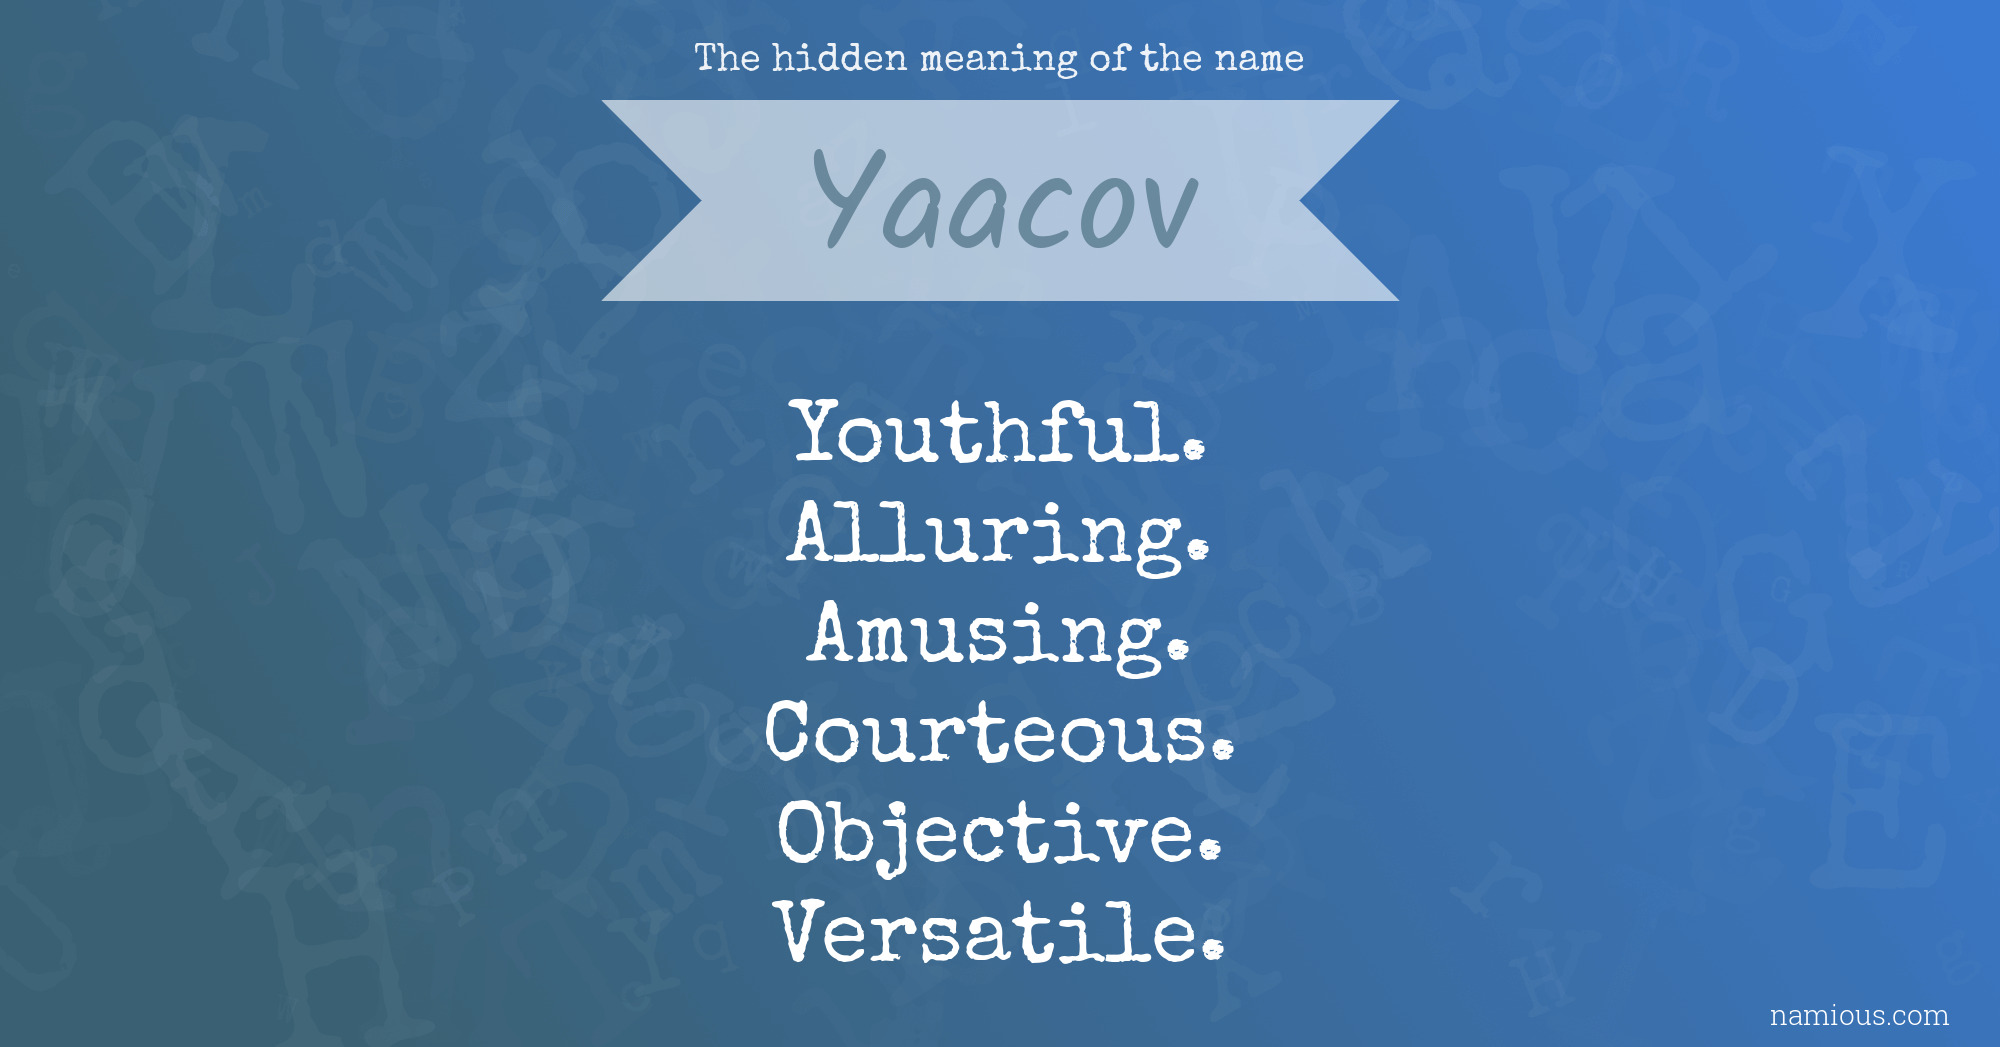 The hidden meaning of the name Yaacov